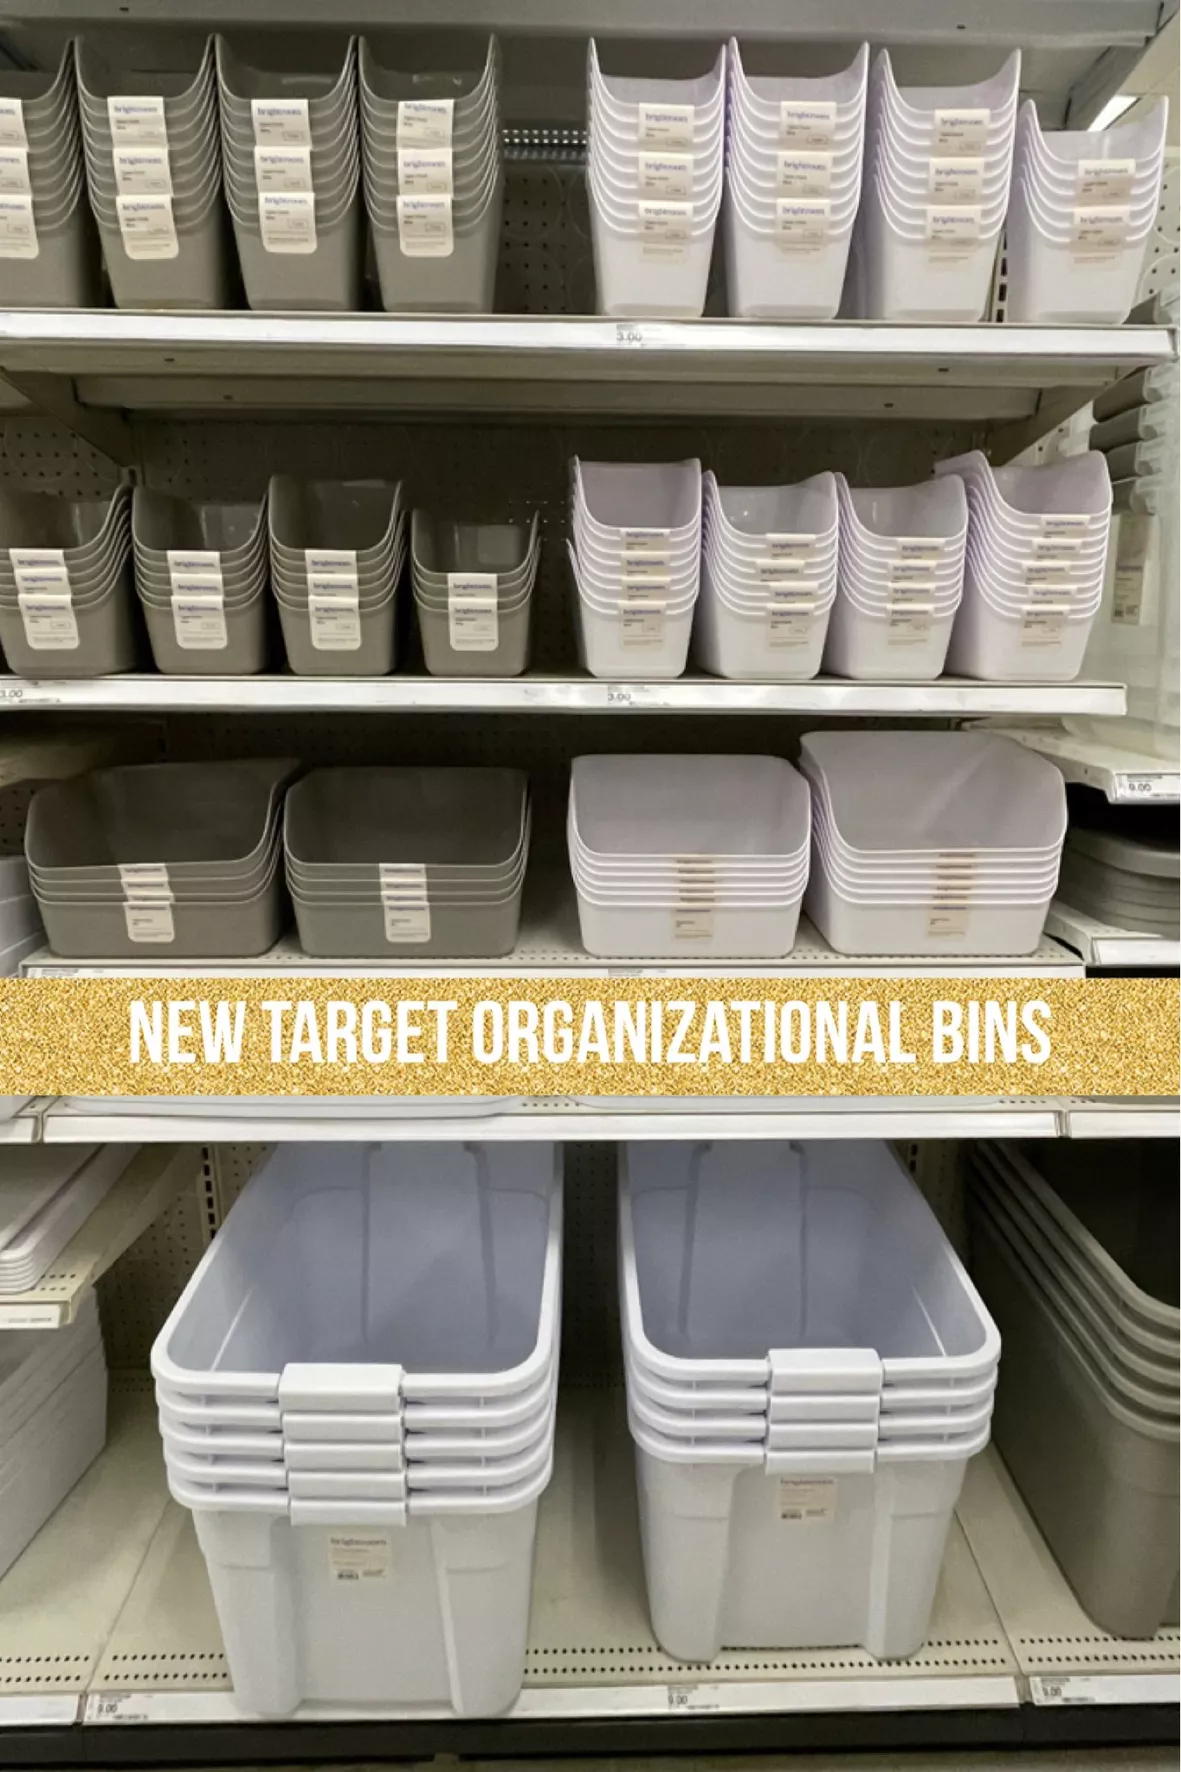 PSA! Large Brightroom storage bins from Target can perfectly fit